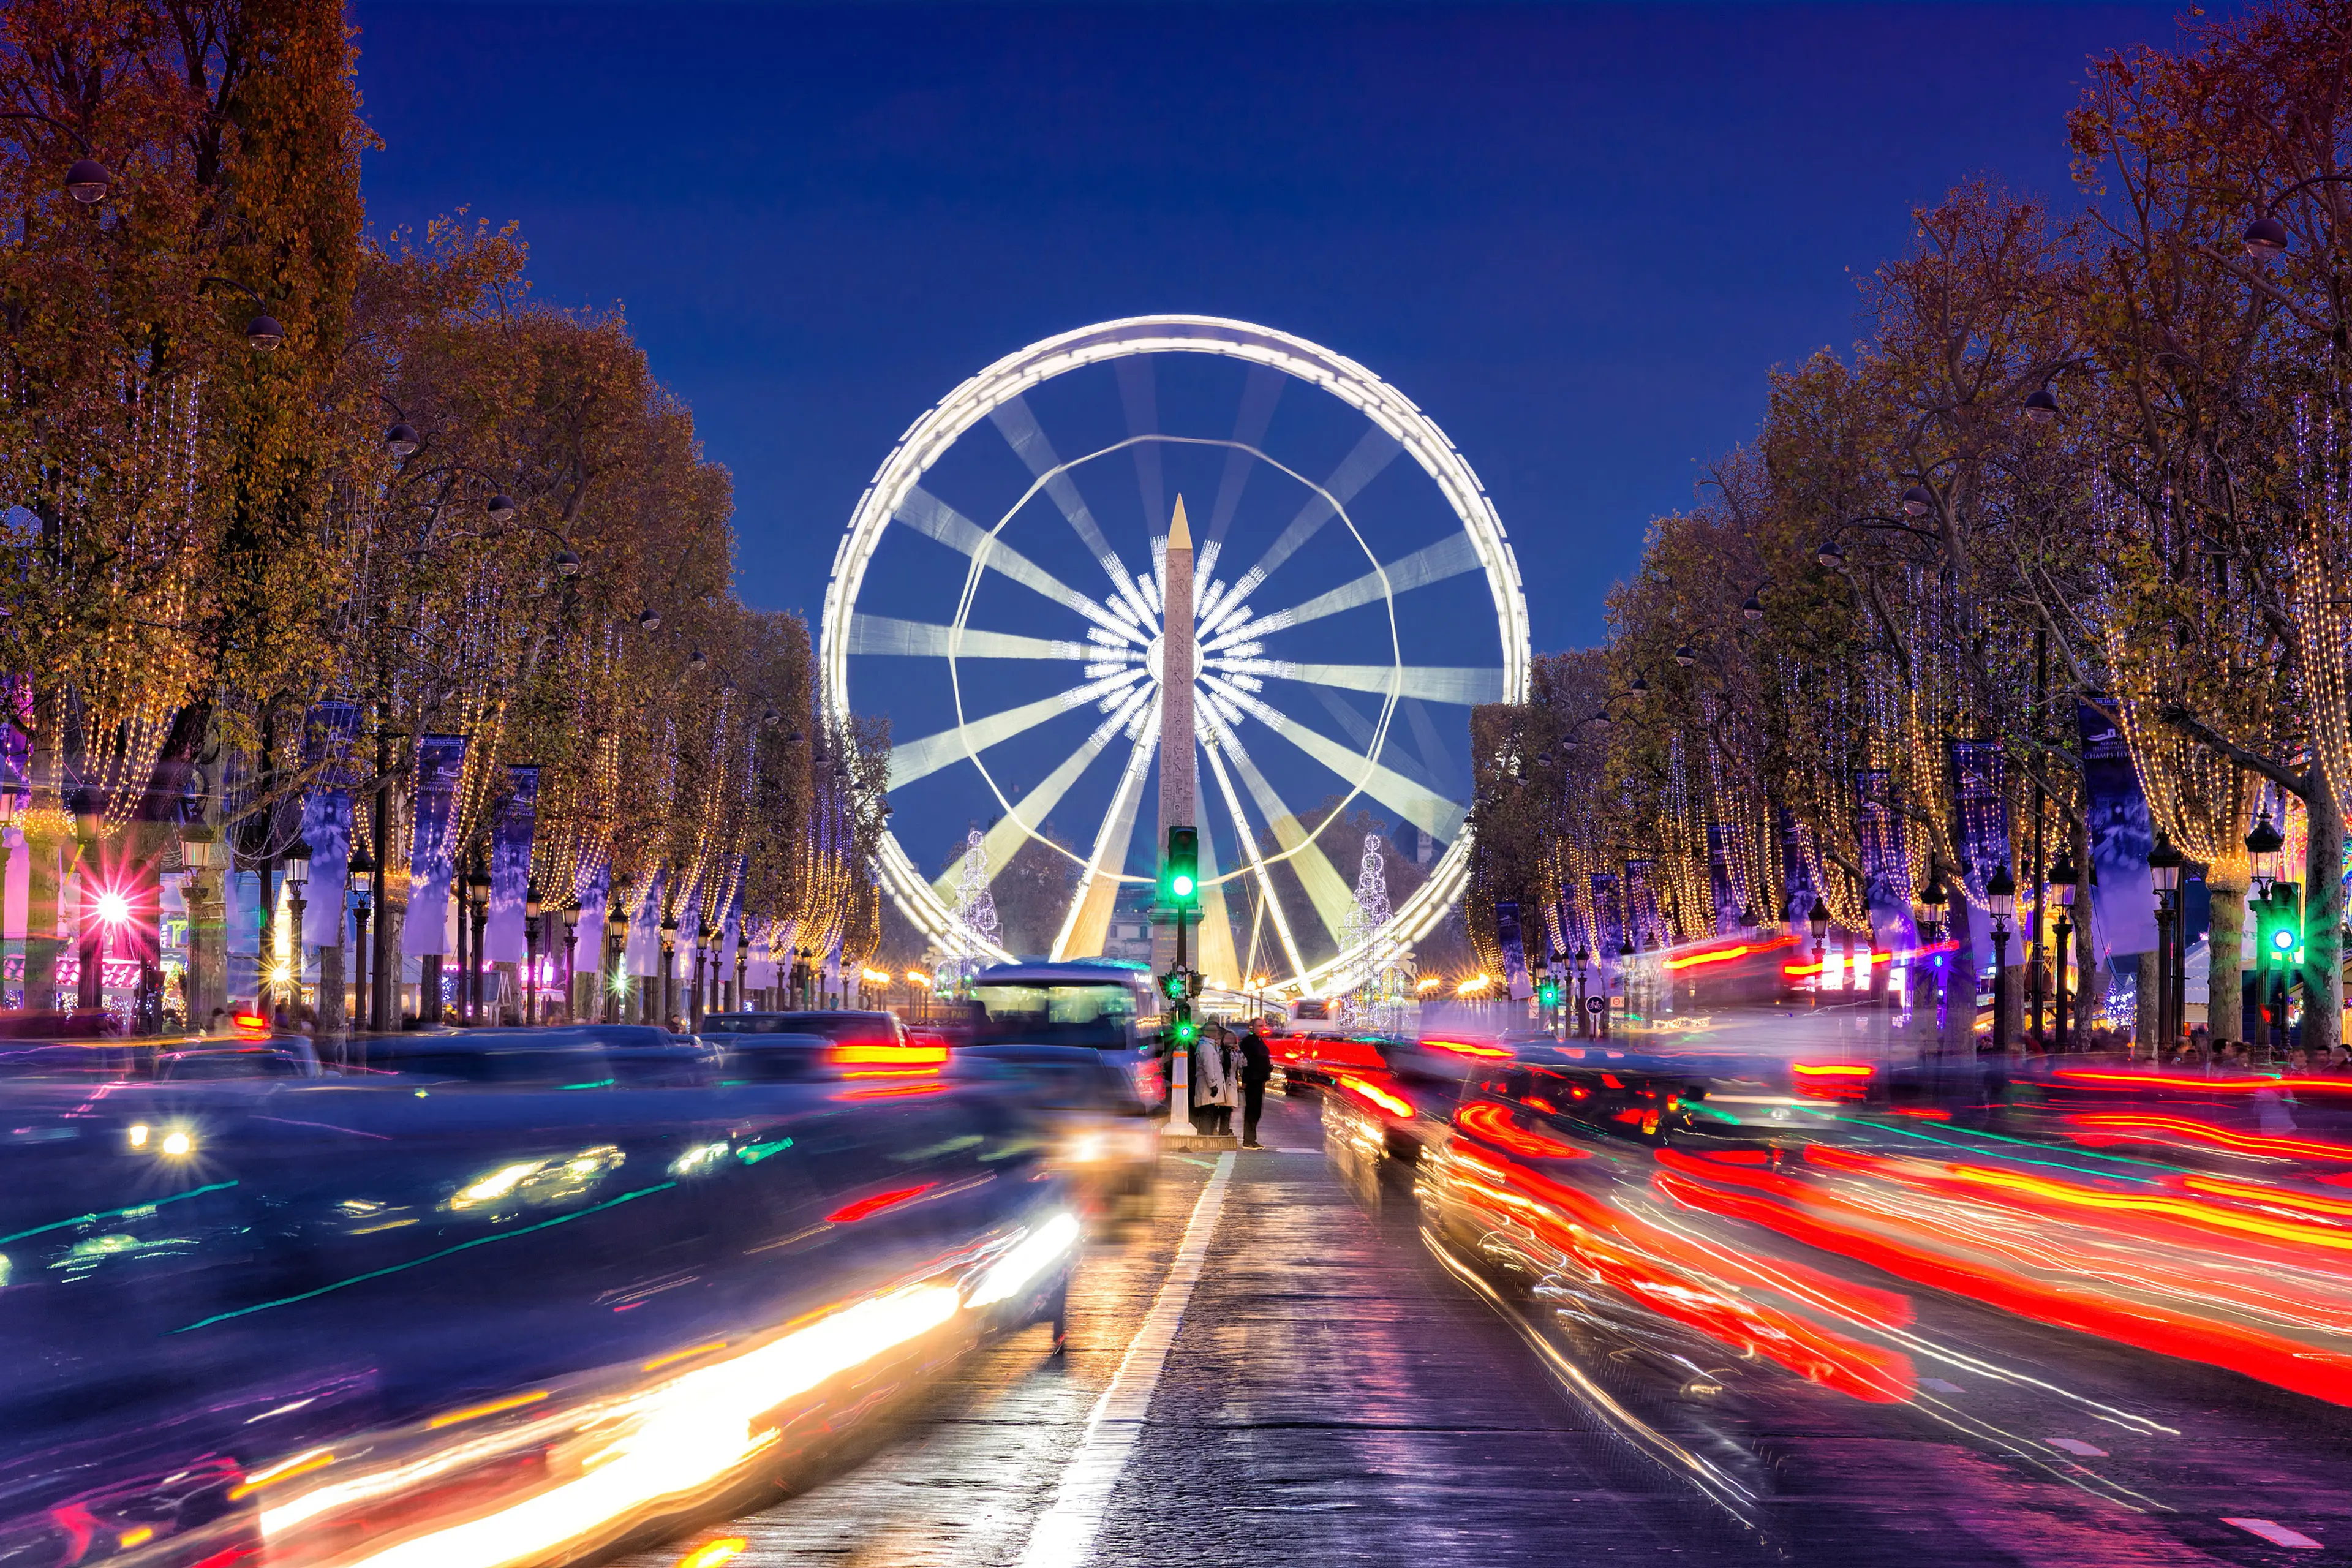 Avenue des Champs-Elysees leading up to the Grande Roue